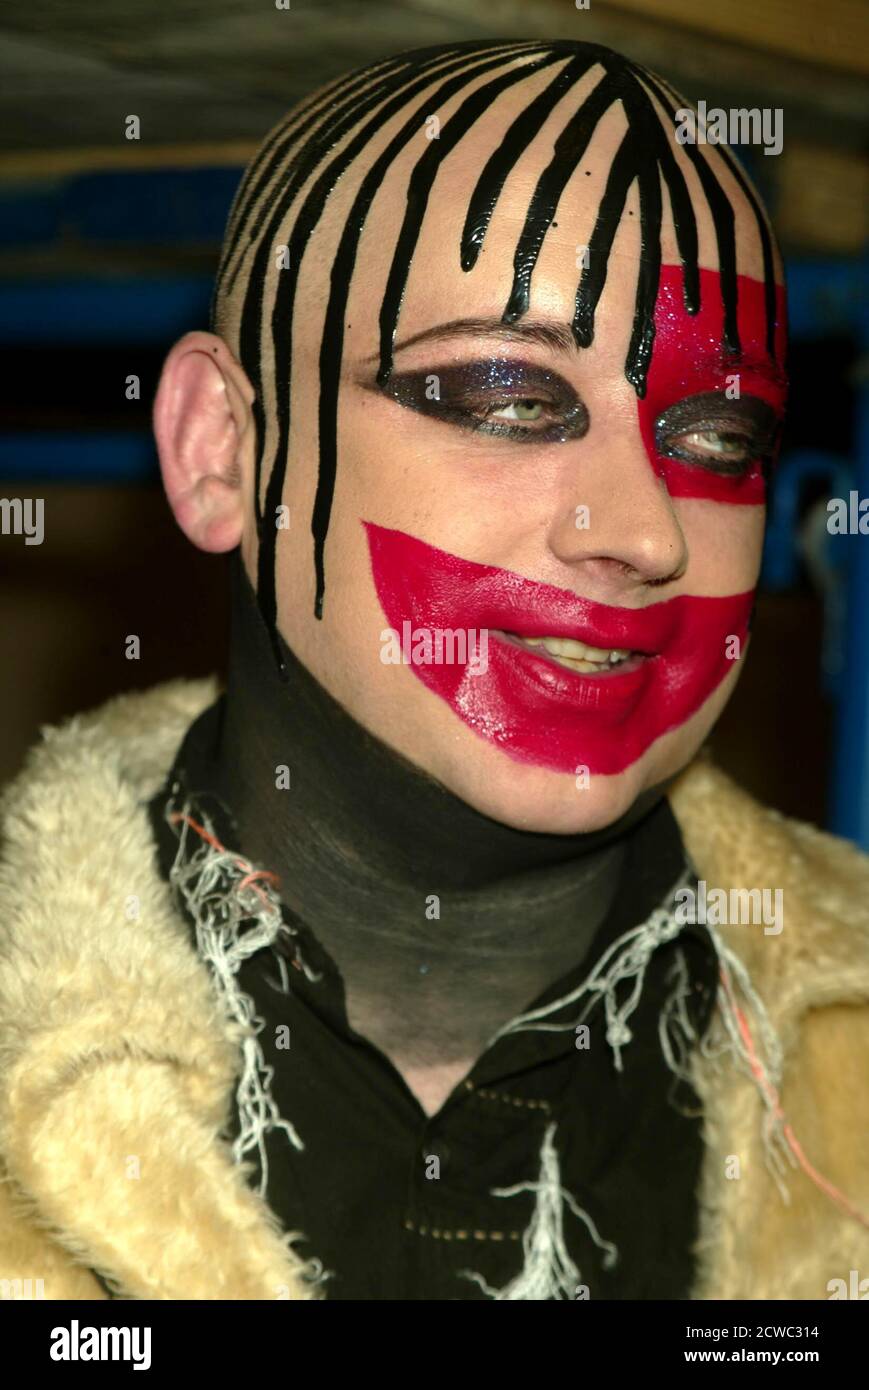 Boy George At Taboo Open Rehearsals At The 42Nd Street Studios, New York City .09/30/2003. Credit: Henry McGee/MediaPunch Stock Photo